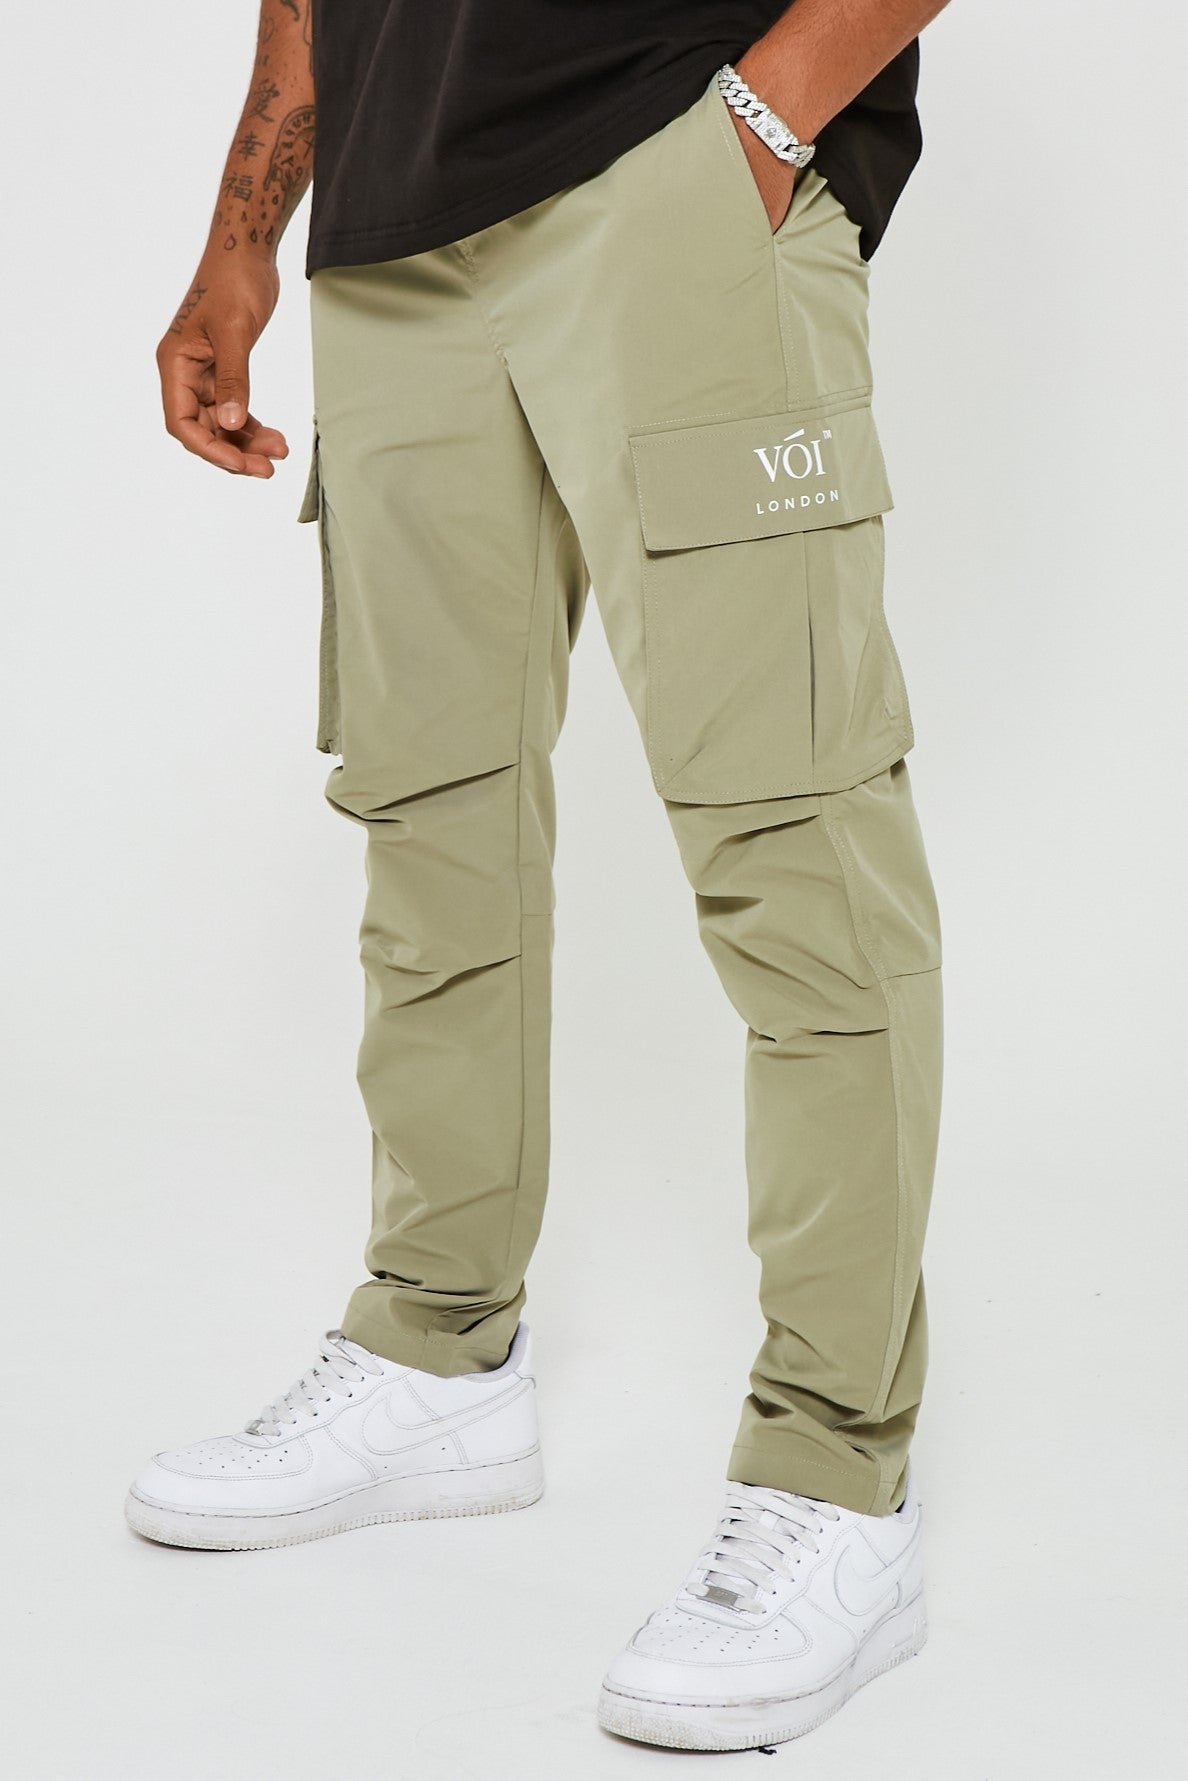 Mens Woven Cargo Pants, Tapered Fit Elasticated Waist, Khaki Green ...